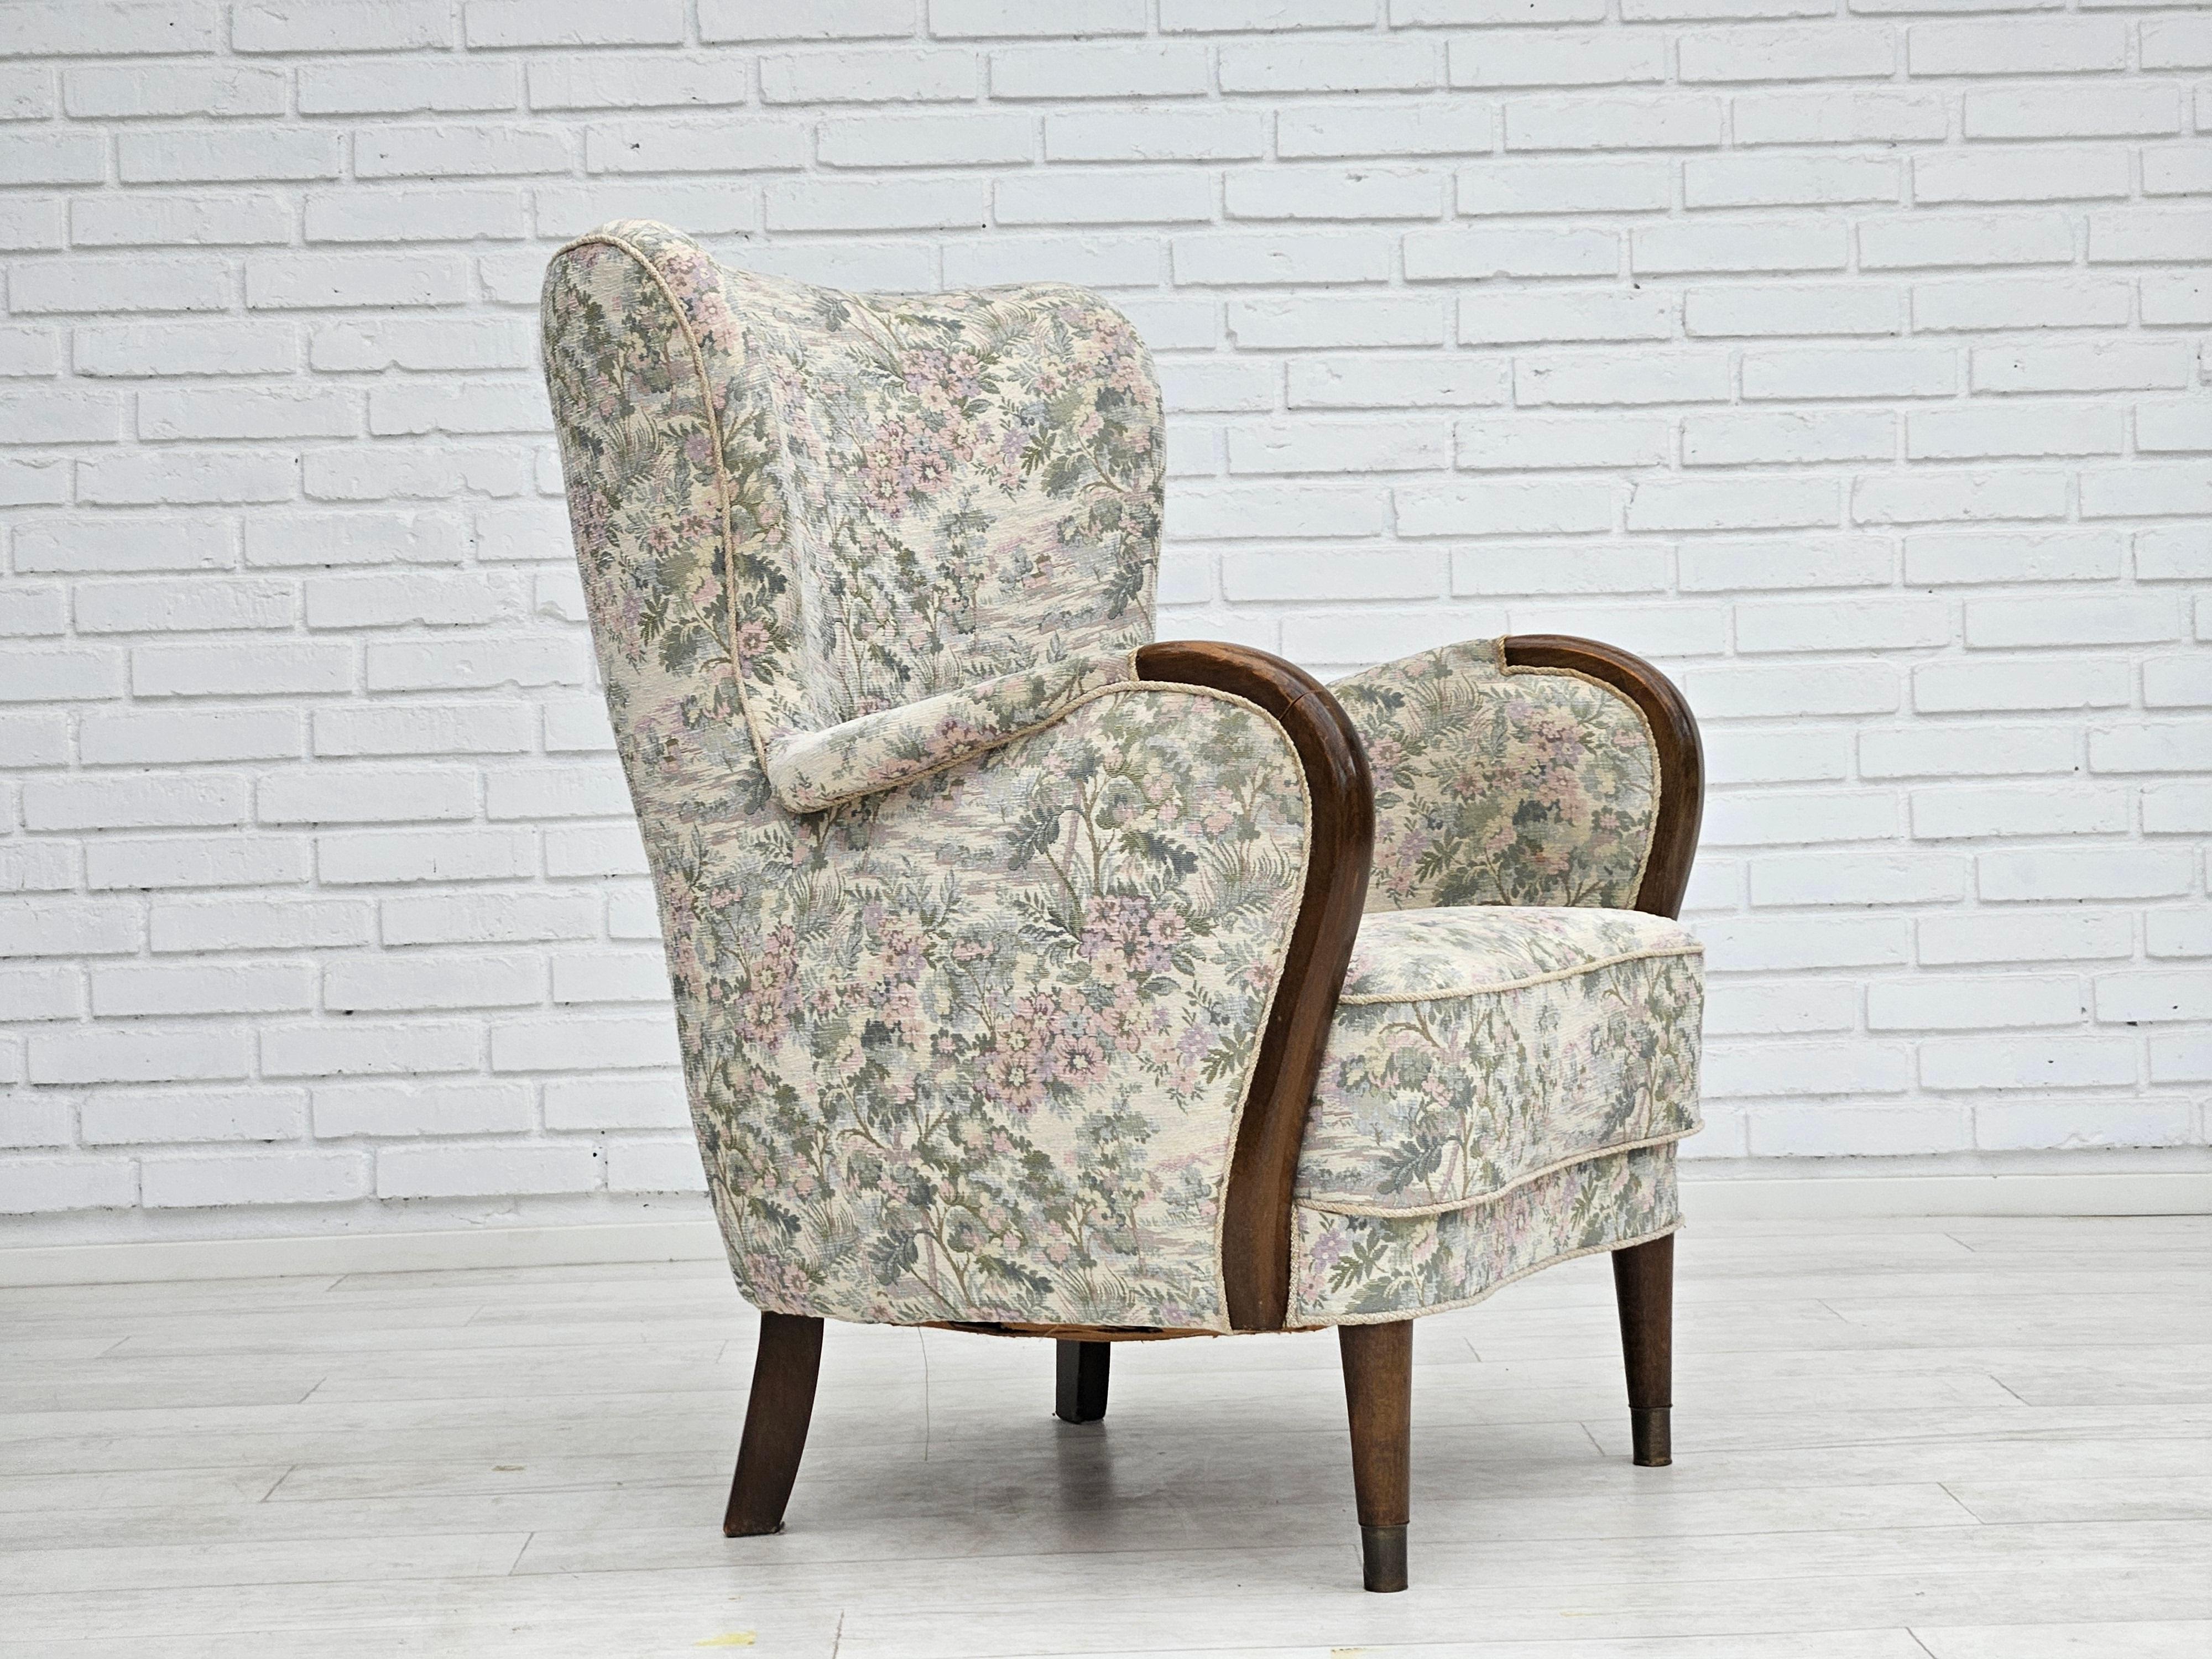 1950-60s, Danish design. Armchair in floral light fabric. Good condition: no smells and no stains. Legs and armrest in beechwood. Front legs with brass plugs. Brass springs in seat. Manufactured by Danish furniture manufacturer in about 1955s.